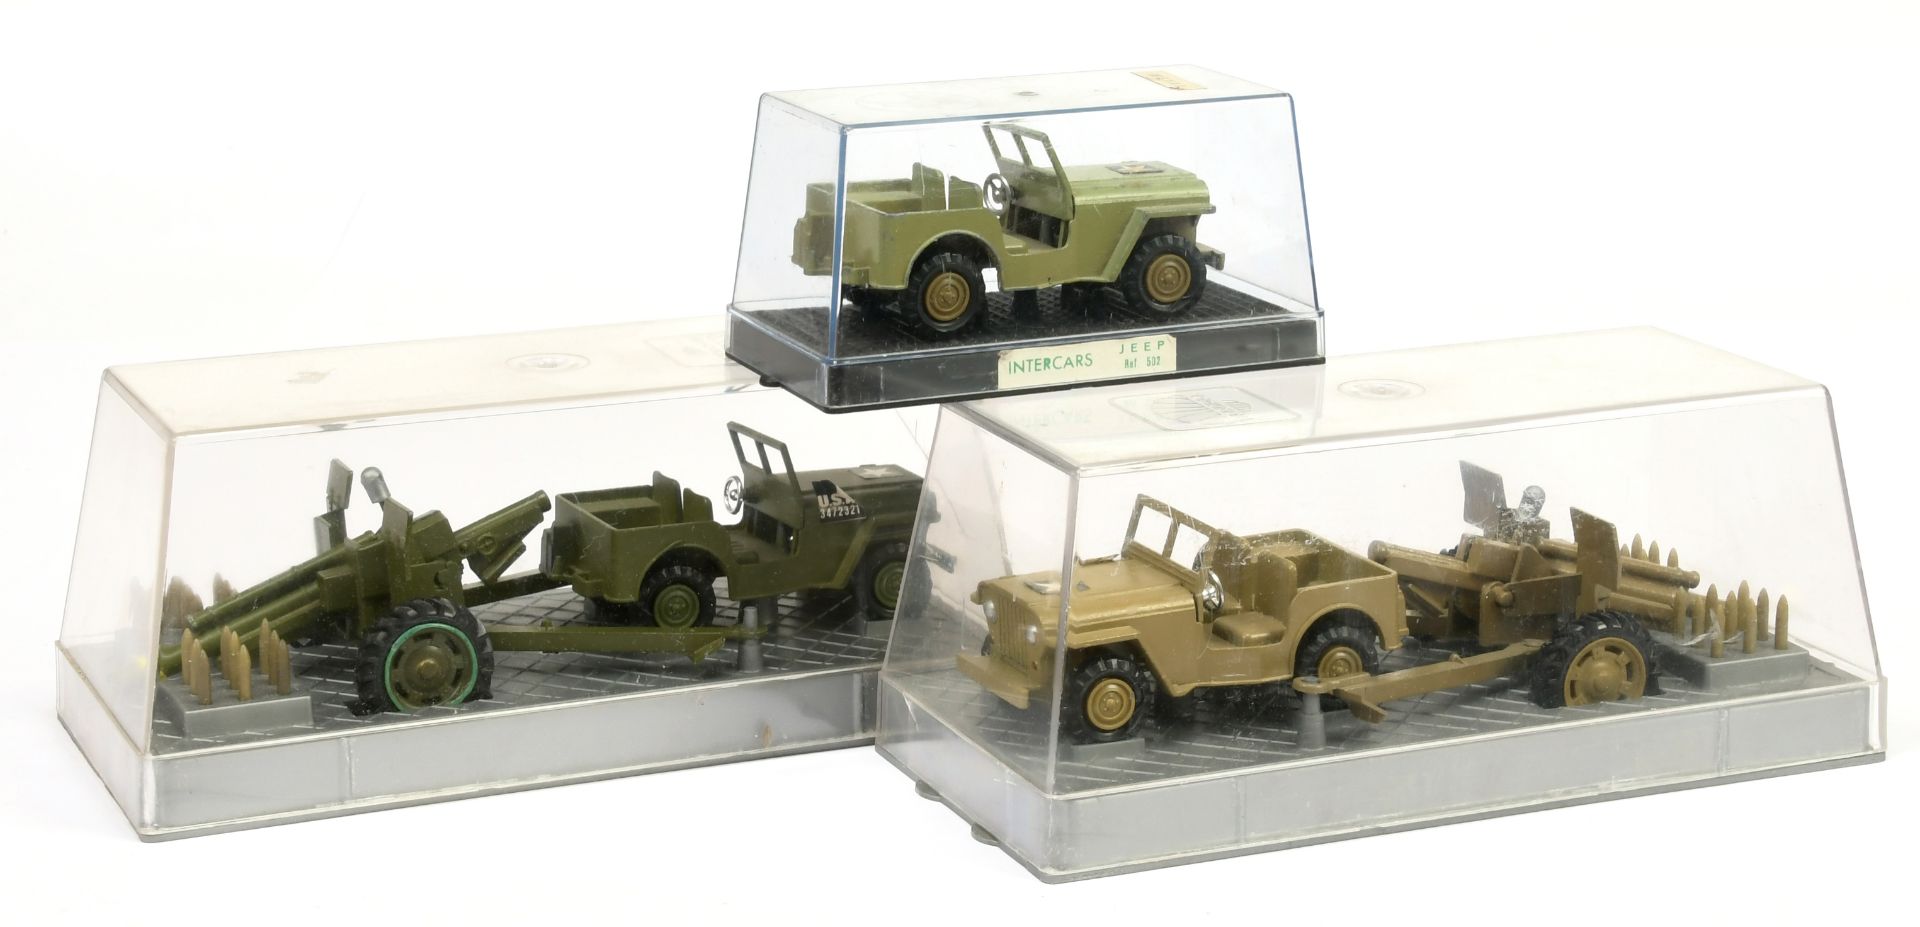 Nacoral (Spain) Military a group of 3 - (1) jeep with field gun and shells - green.